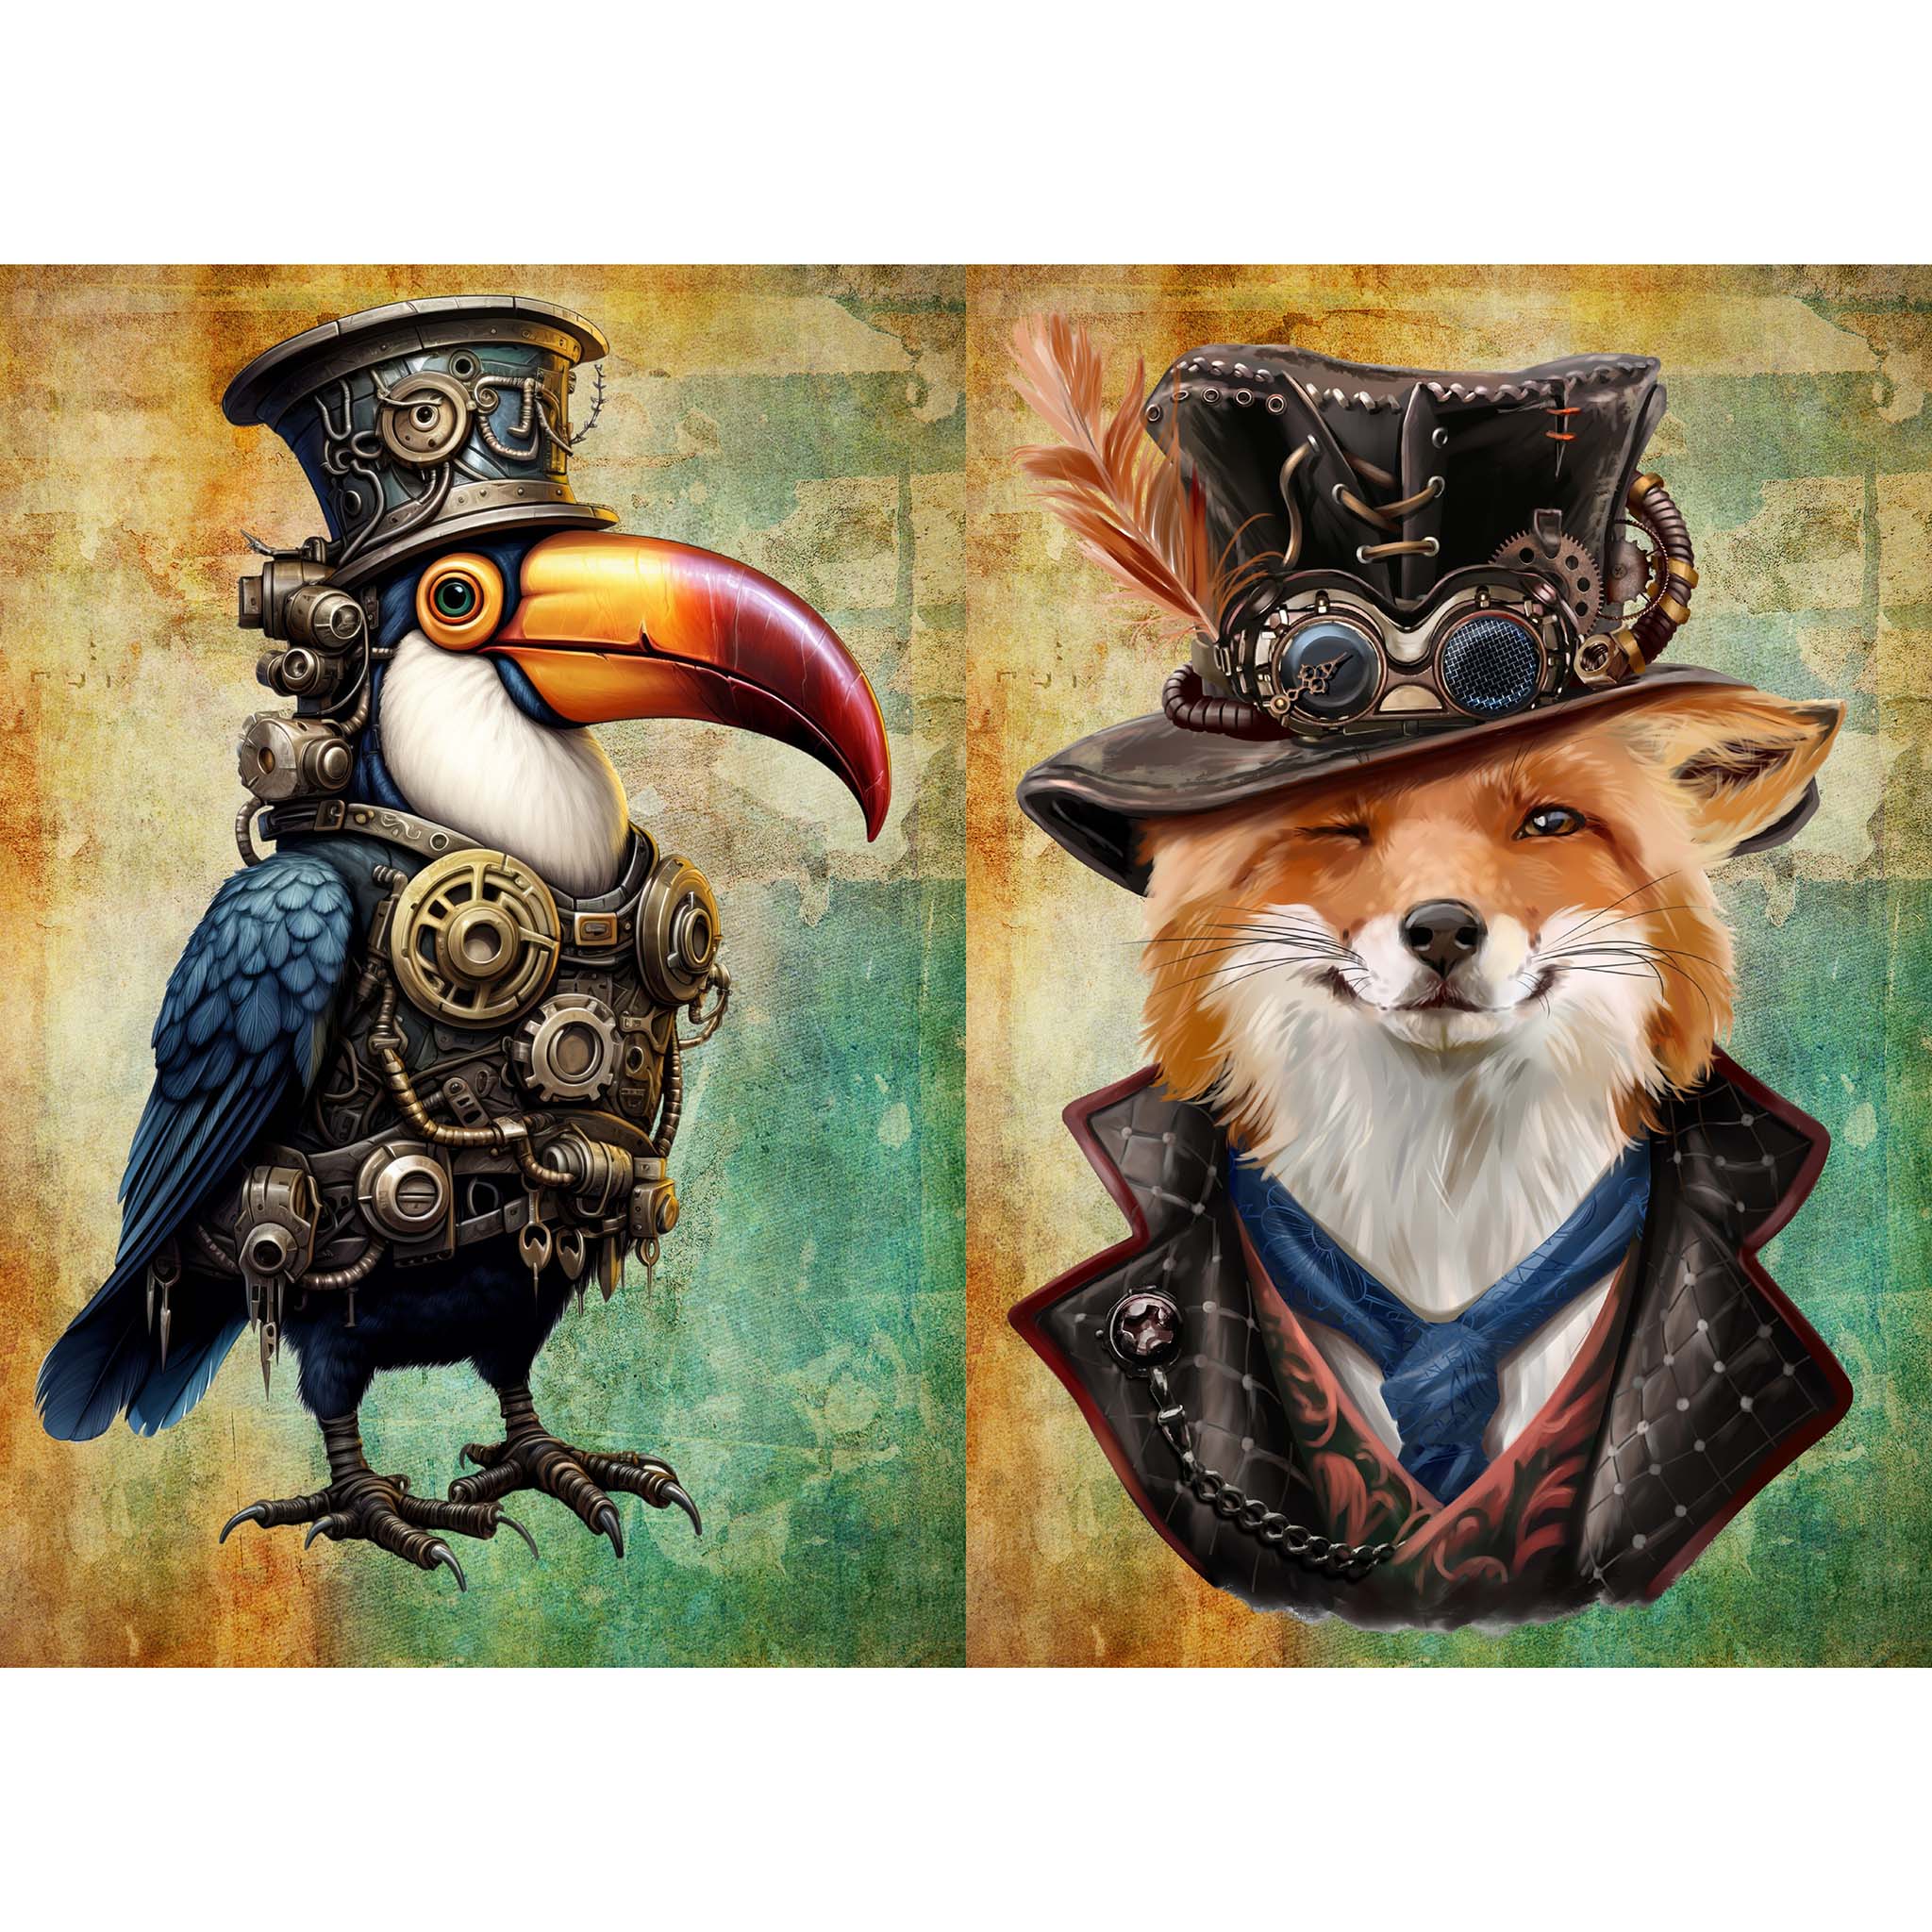 Tissue paper featuring two full steampunk fashion designs of a parrot and fox adorned with gears and cogs. White borders are on the top and bottom.